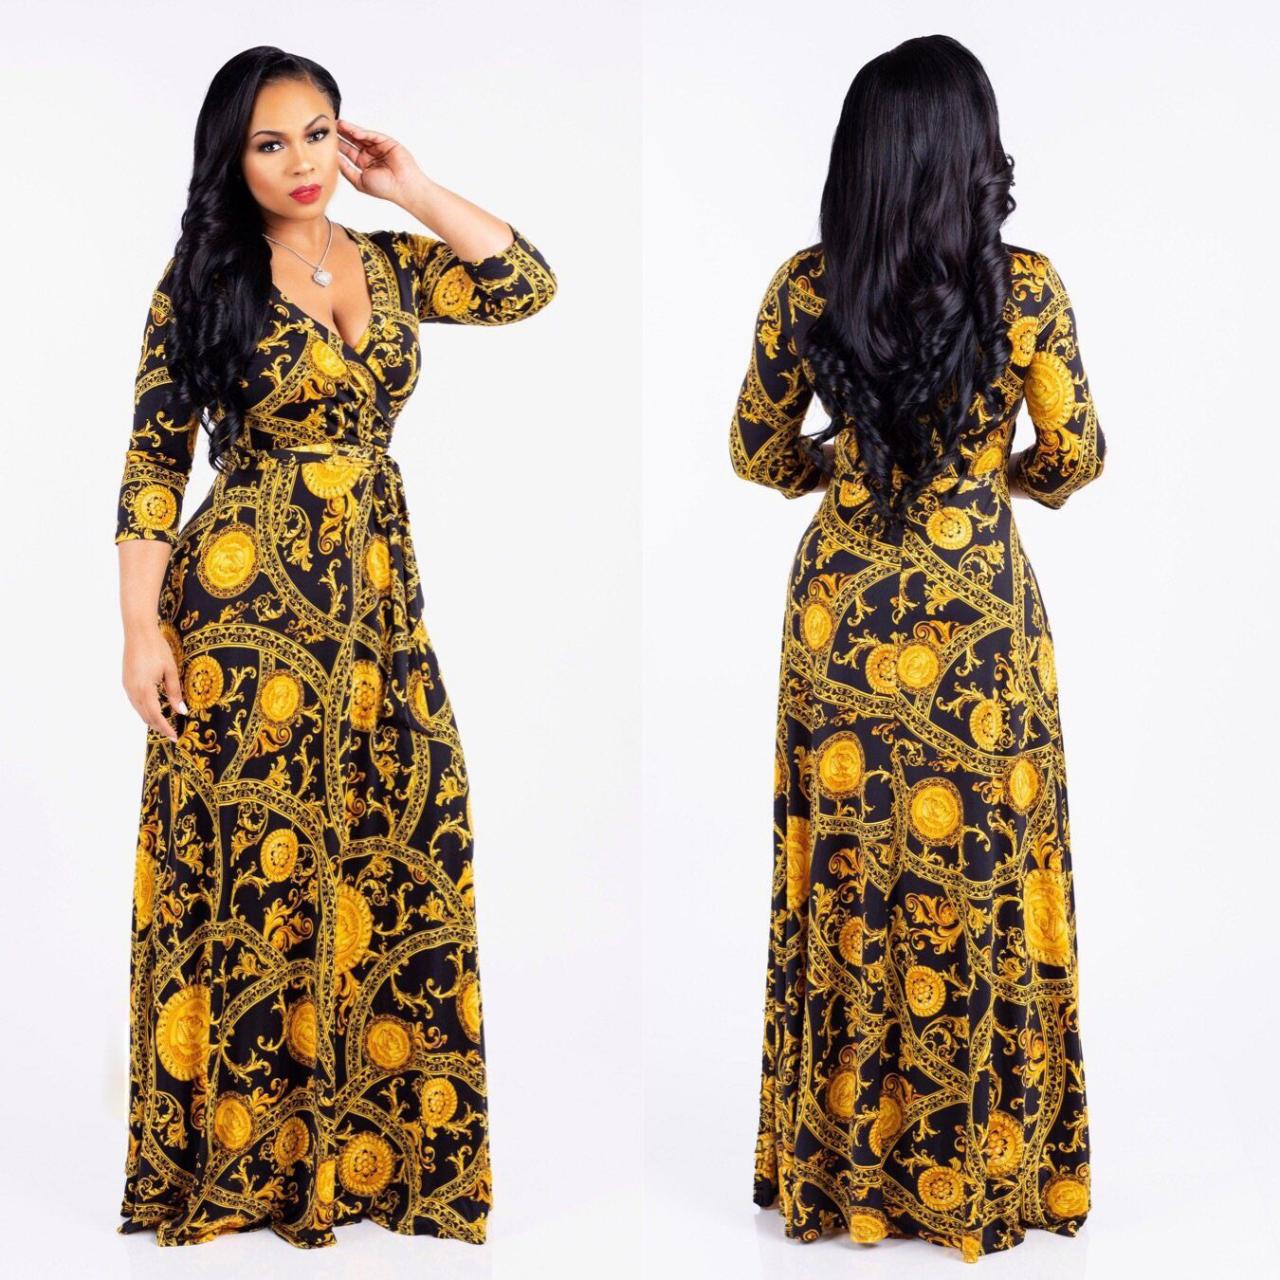 Women Floral Printed Maxi Dress V Neck Boho 3/4 Sleeve Belted Casual Beach Long Party Dress3#